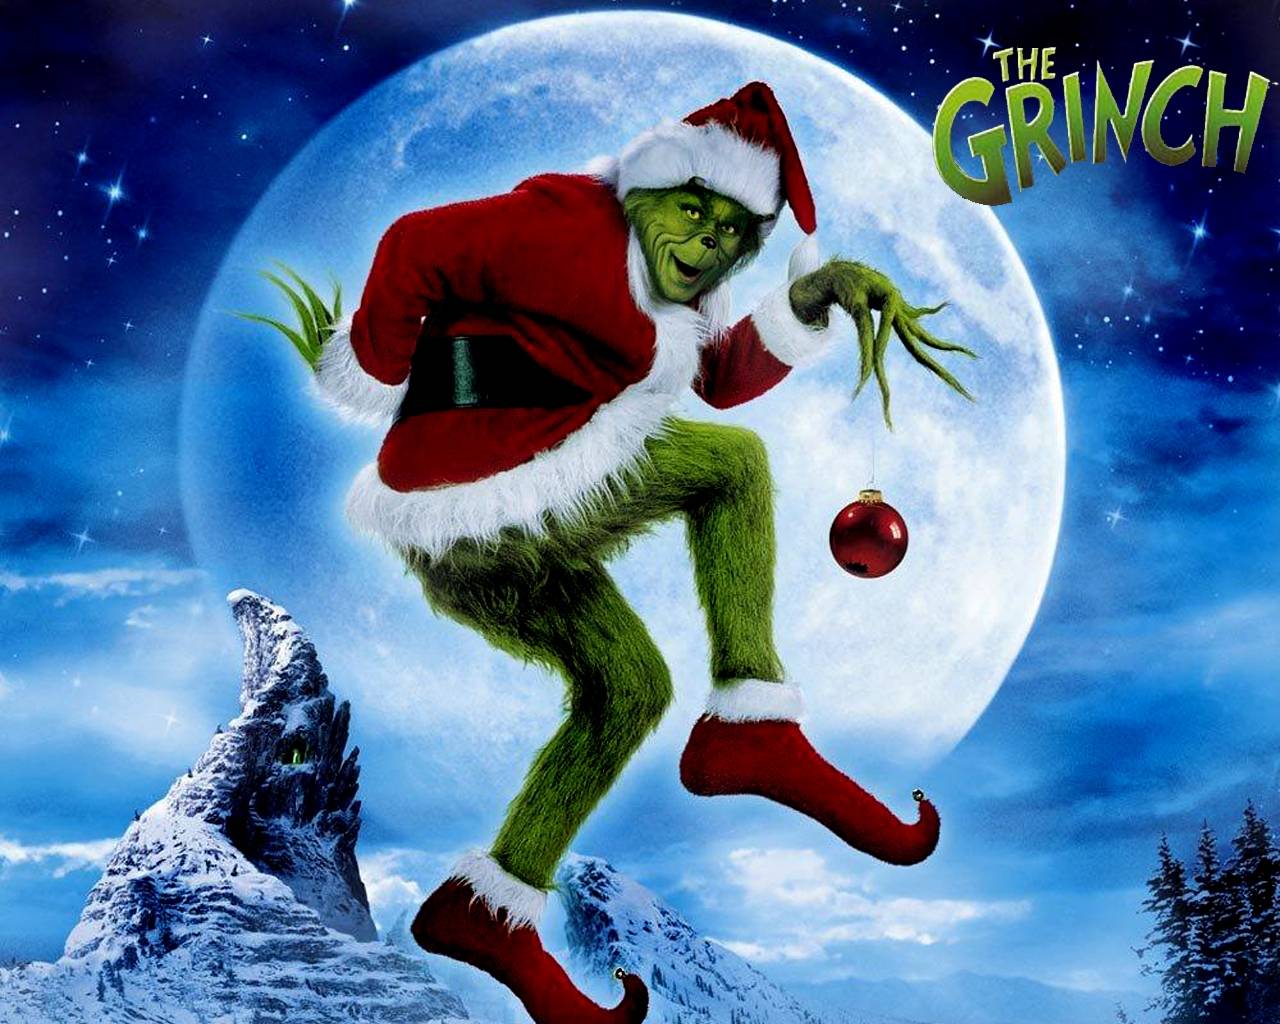 The Grinch Santa With Snowflake In Dark Background HD The Grinch Wallpapers   HD Wallpapers  ID 51387